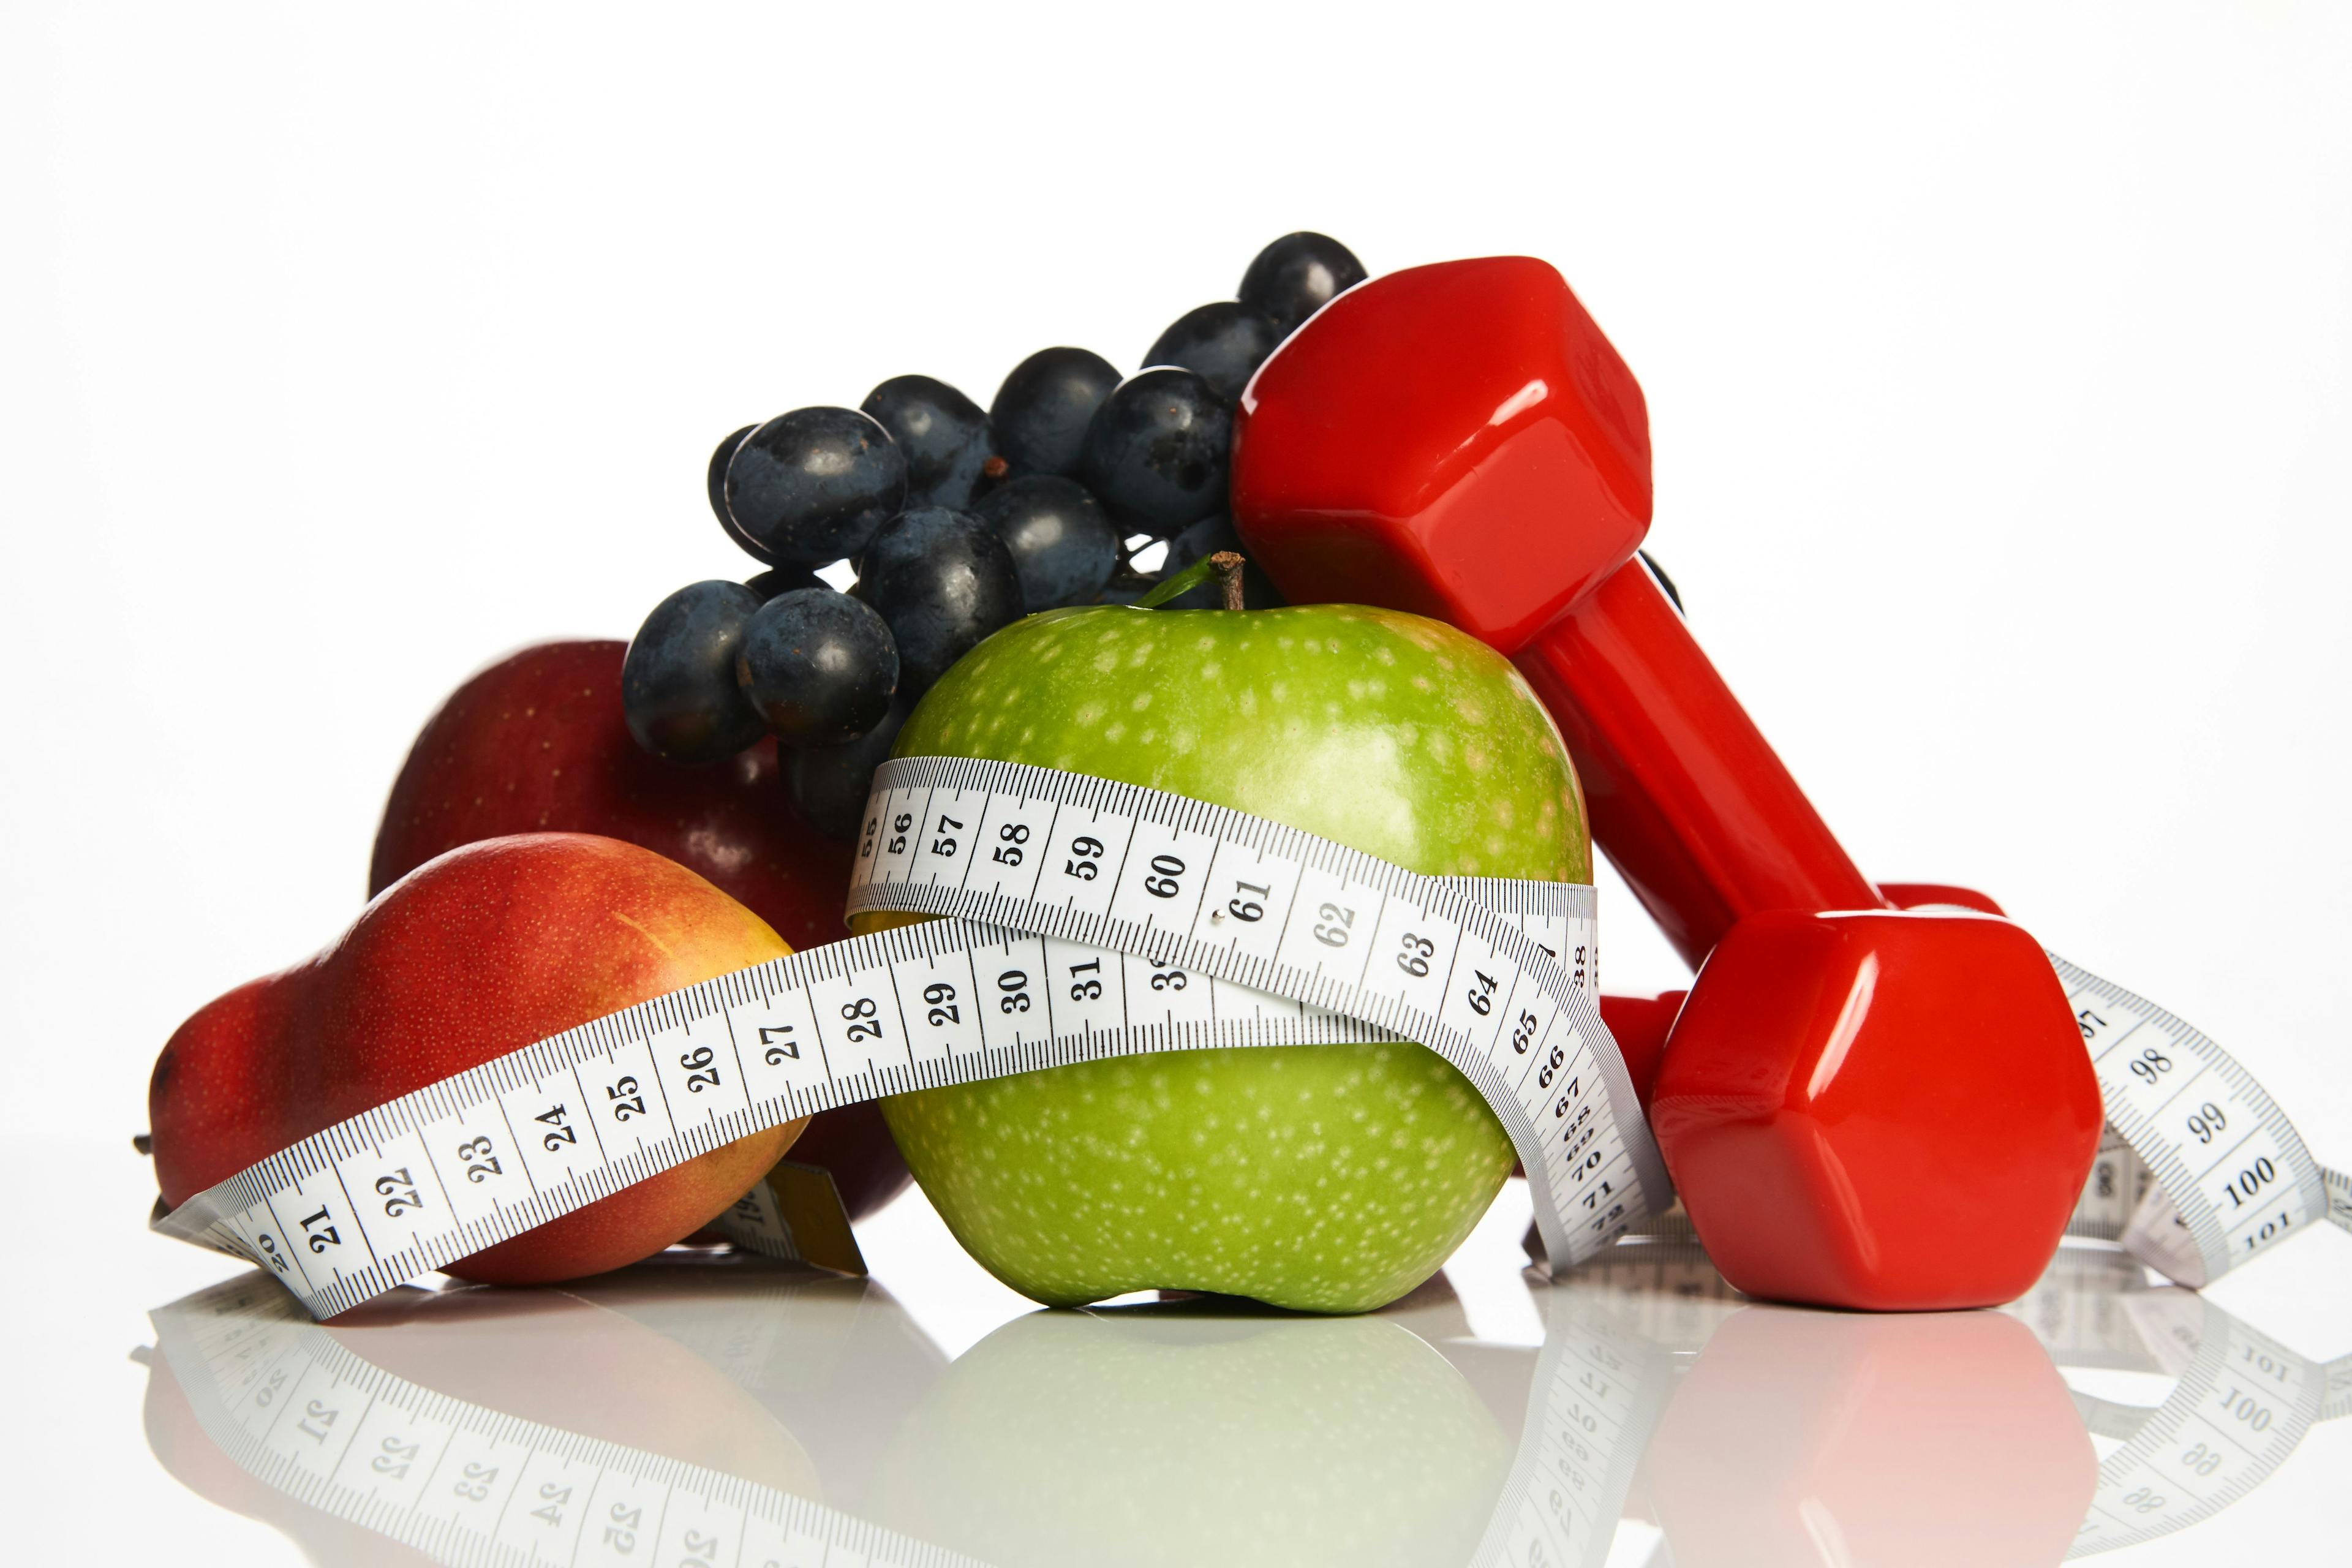 Diets Including Whole Fruits May Decrease Risk of Developing Type 2 Diabetes